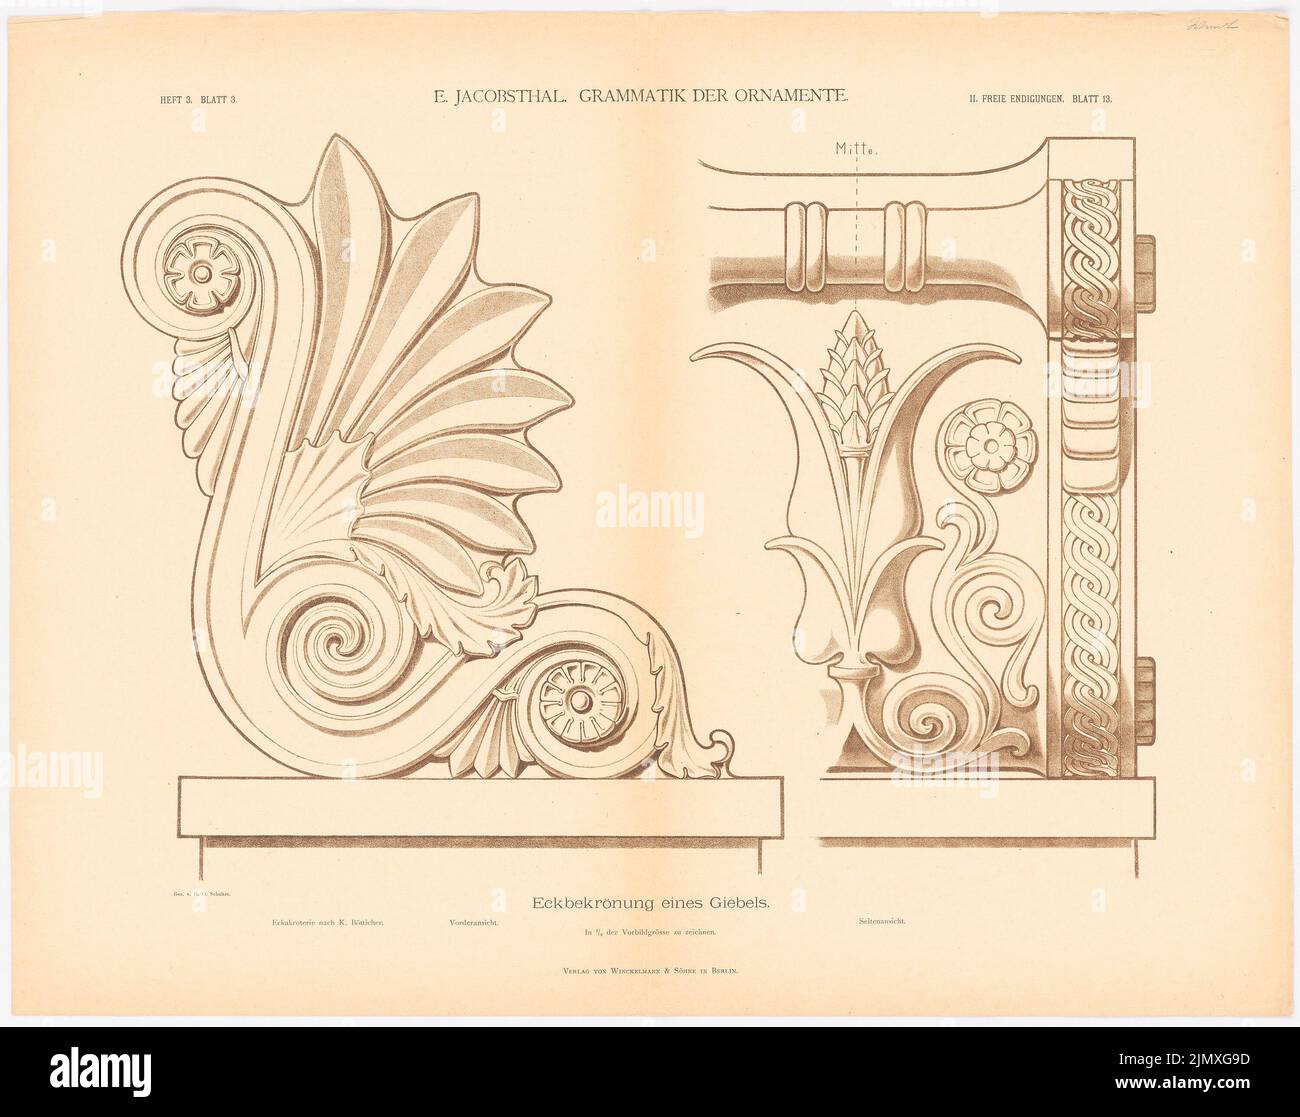 Jacobsthal Johann Eduard (1839-1902), grammar of the ornaments (without dat.): Corver groans of a gable, issue 3. Sheet 3 .. Lithography on paper, 56.3 x 71.2 cm (including scan edges) Jacobsthal Johann Eduard  (1839-1902): Grammatik der Ornamente Stock Photo